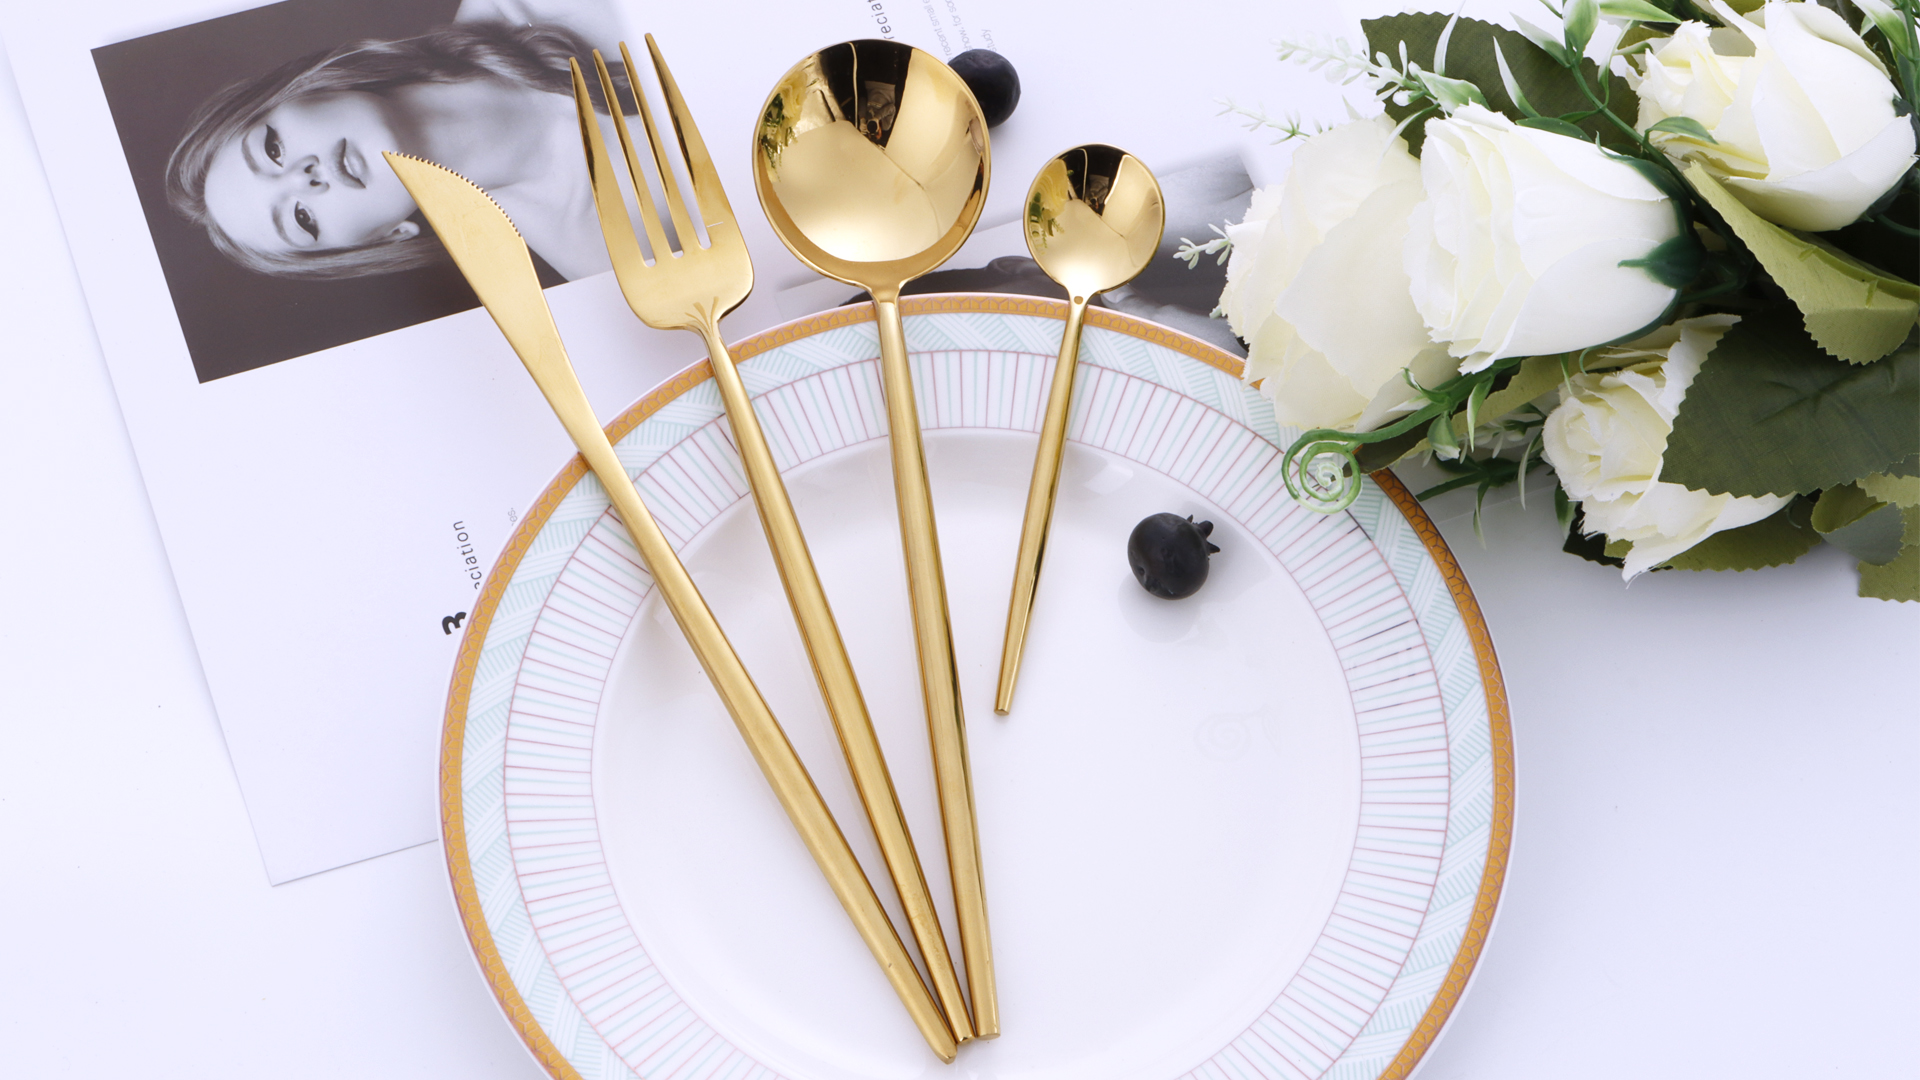 How to choose the best golden tableware?